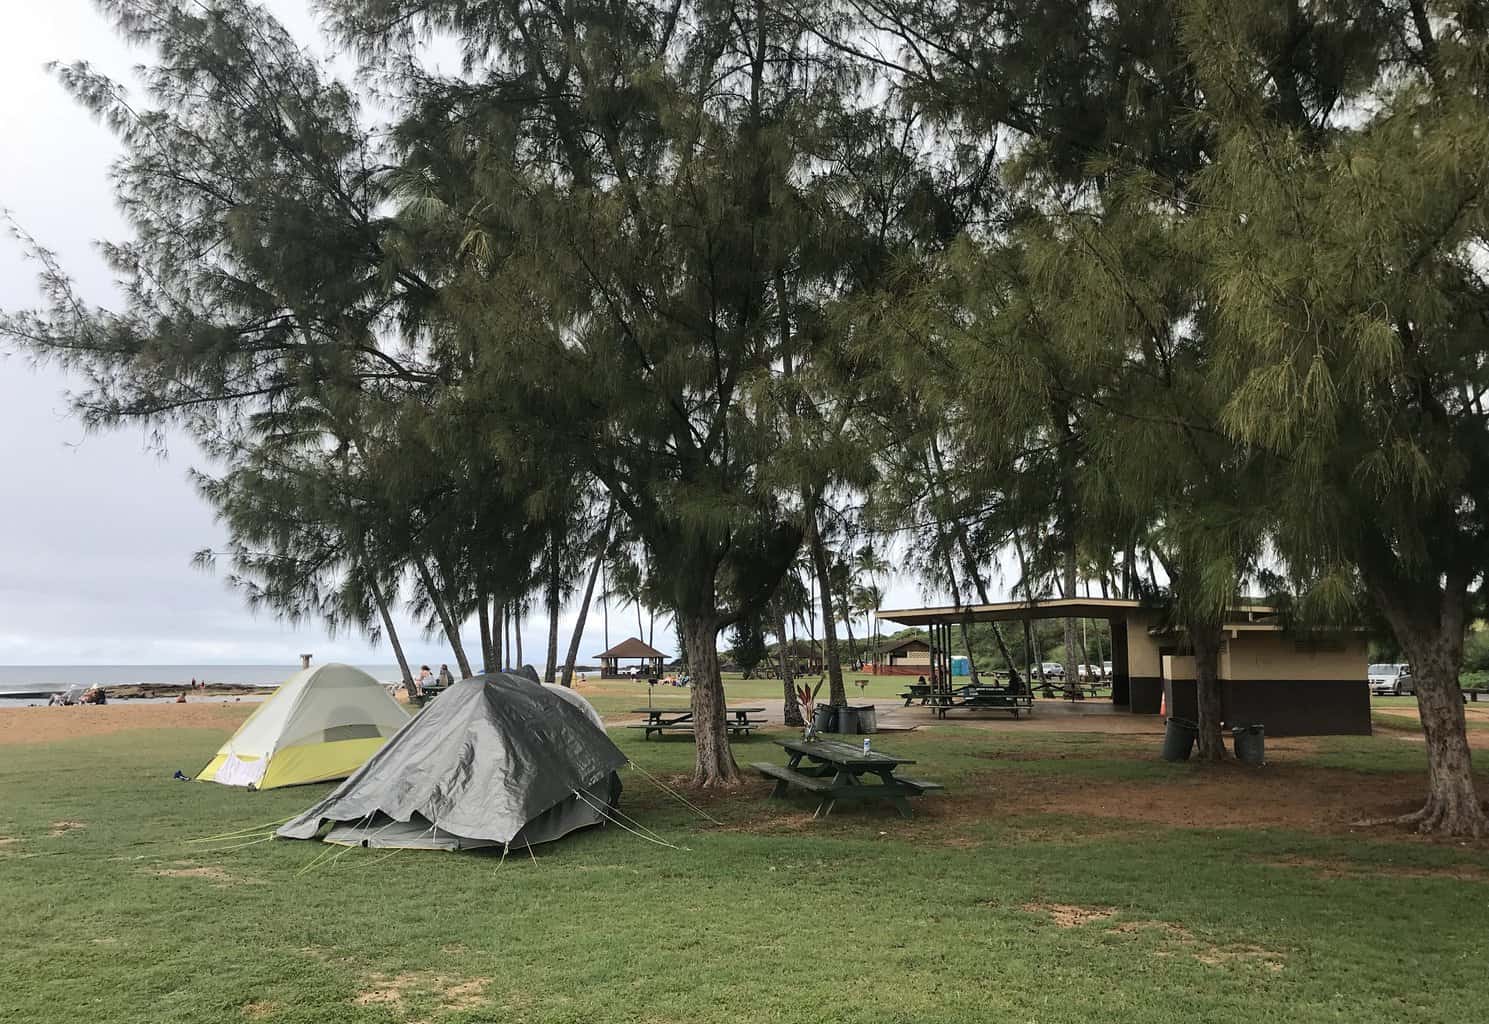 Camping Permits Now Available for Salt Pond and Lydgate Beach Parks